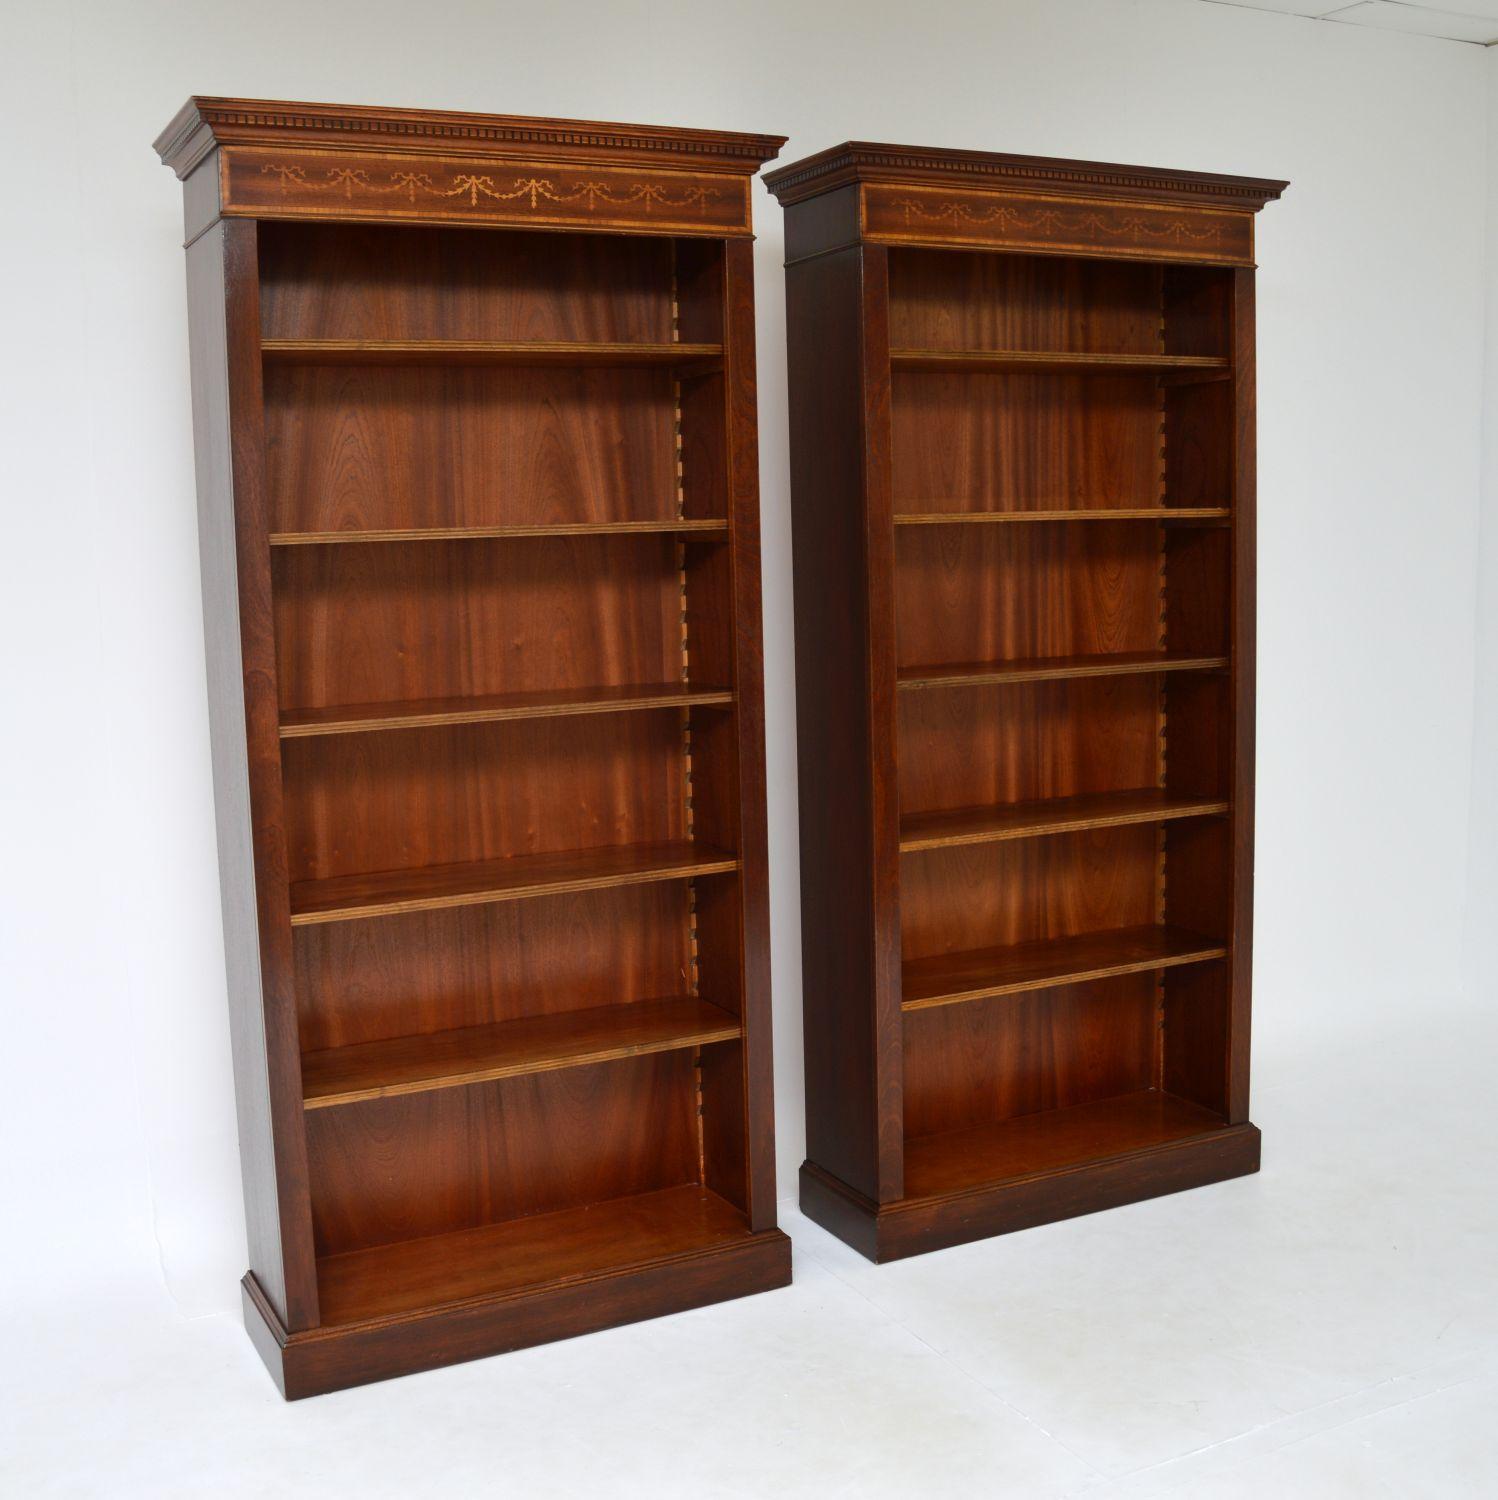 A smart and very useful pair of open bookcases in the antique Sheraton style. These were made in England, they date from around the 1950-60’s. The quality is fantastic, these are very tall and have storage space for lots of books. Each has five